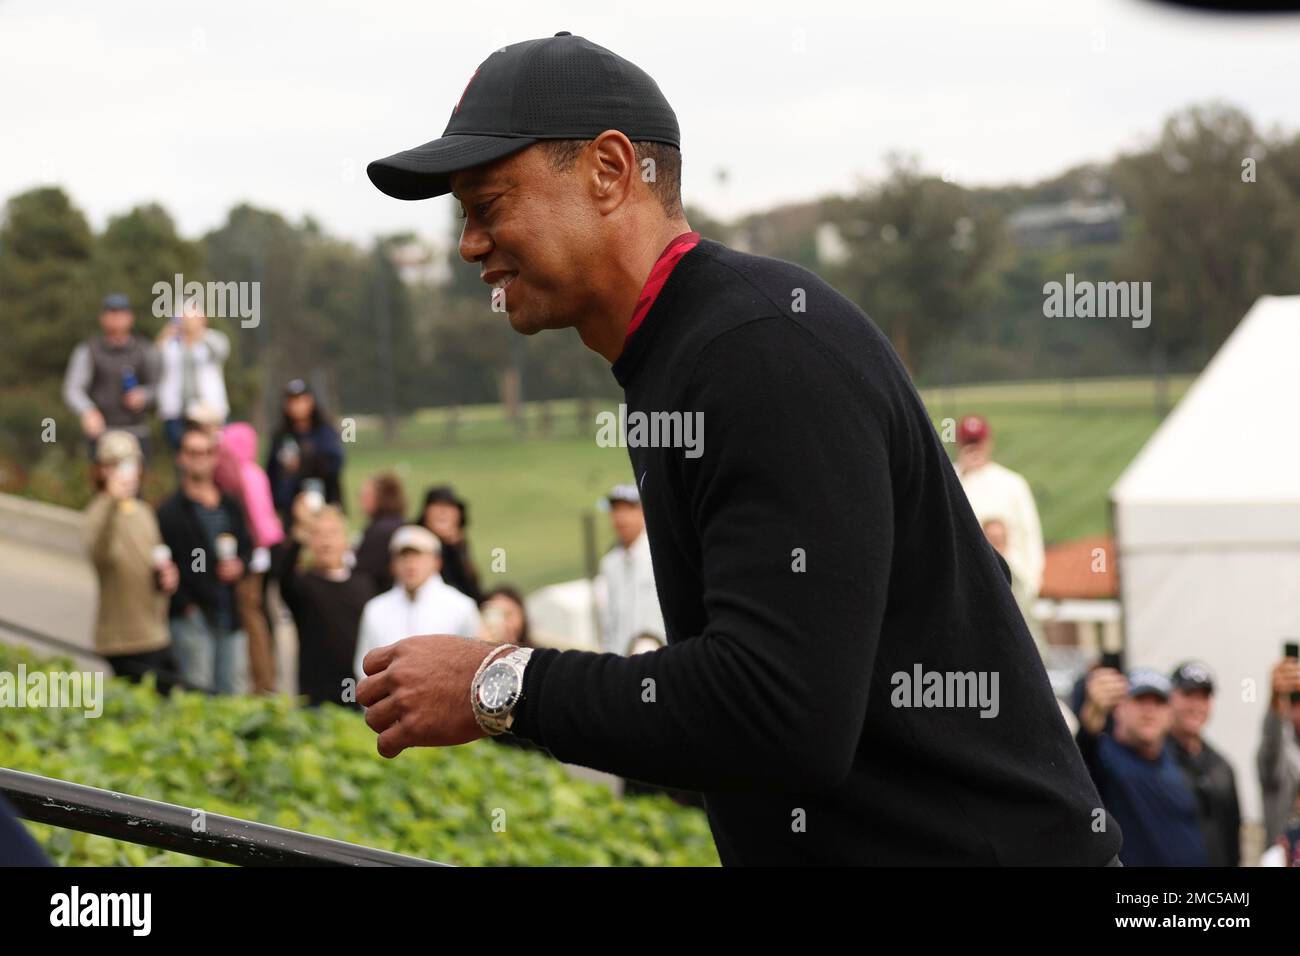 Tiger Woods walks off the course following the trophy ceremony on the 18th green after the Genesis Invitational golf tournament at Riviera Country Club, Sunday, Feb